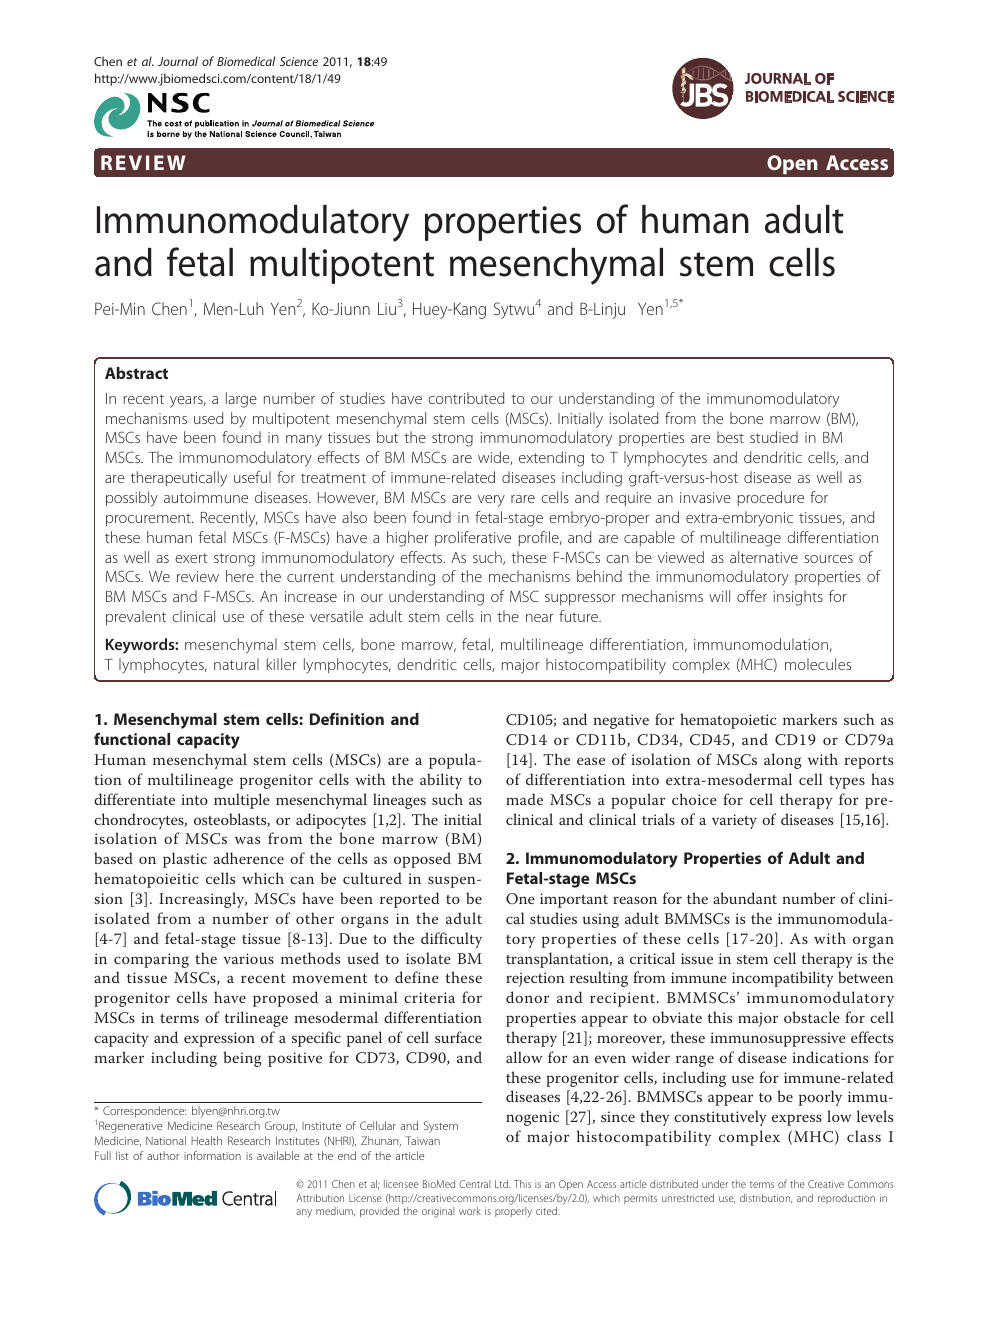 Immunomodulatory Properties Of Human Adult And Fetal Multipotent Mesenchymal Stem Cells Topic Of Research Paper In Biological Sciences Download Scholarly Article Pdf And Read For Free On Cyberleninka Open Science Hub